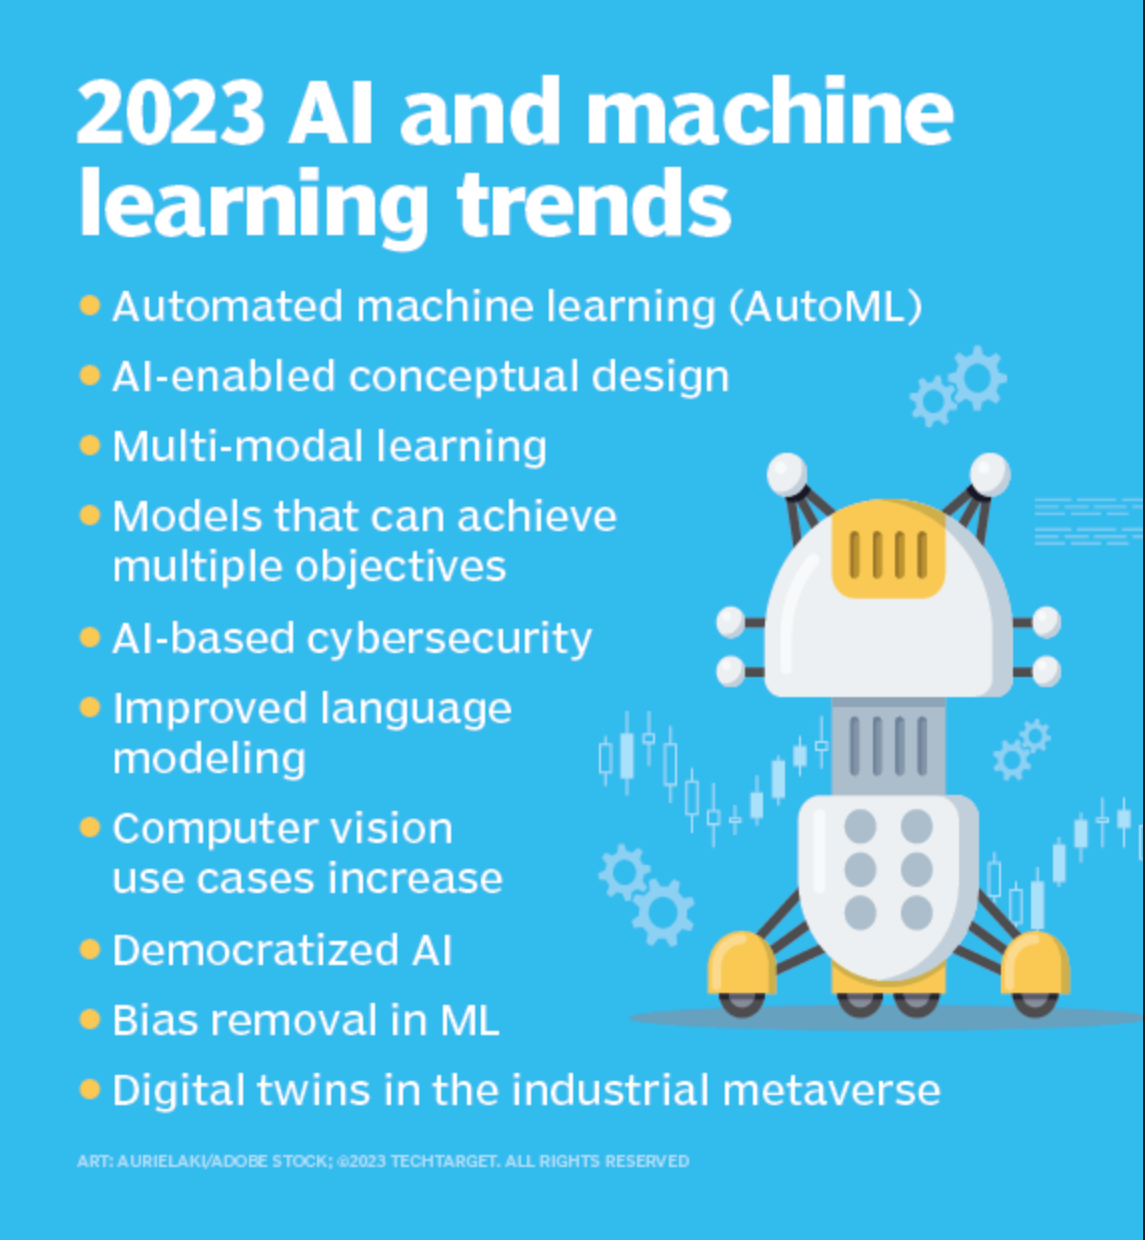 A list of 2023 AI and Machine Learning Trends that include ai enabled conceptual design and ai-based cybersecurity